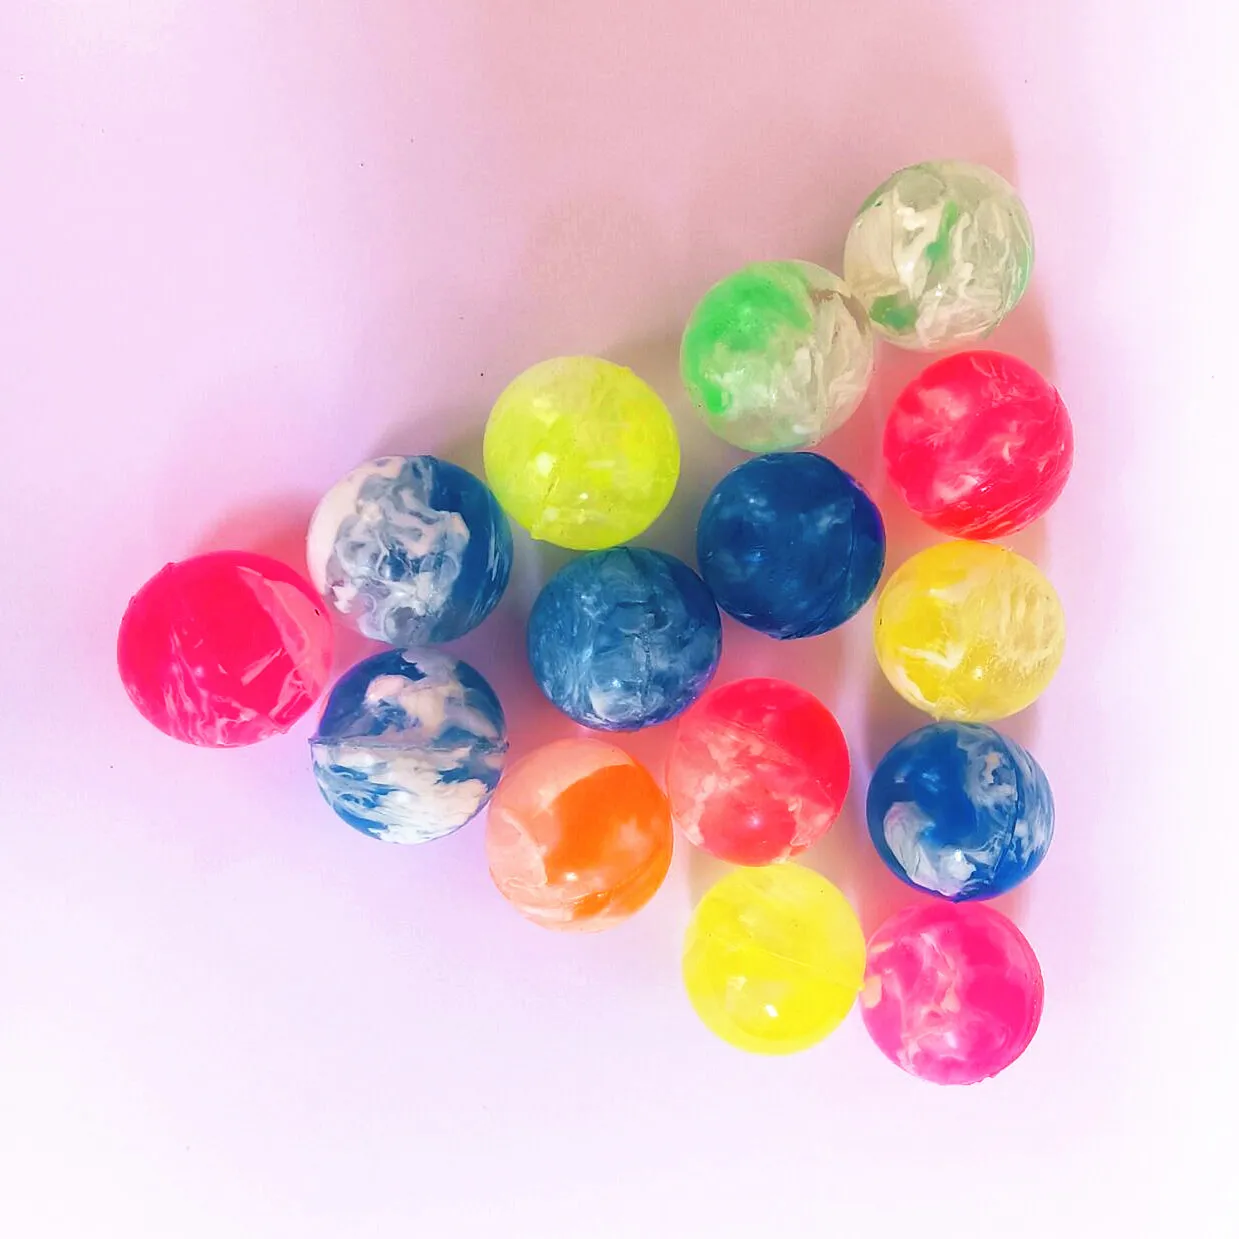 

Rubber 19mm Cloud Bouncy Balls Funny Toy Jumping Balls Mini Neon Swirl Bouncing Balls for Kids Sports Games Toy Balls